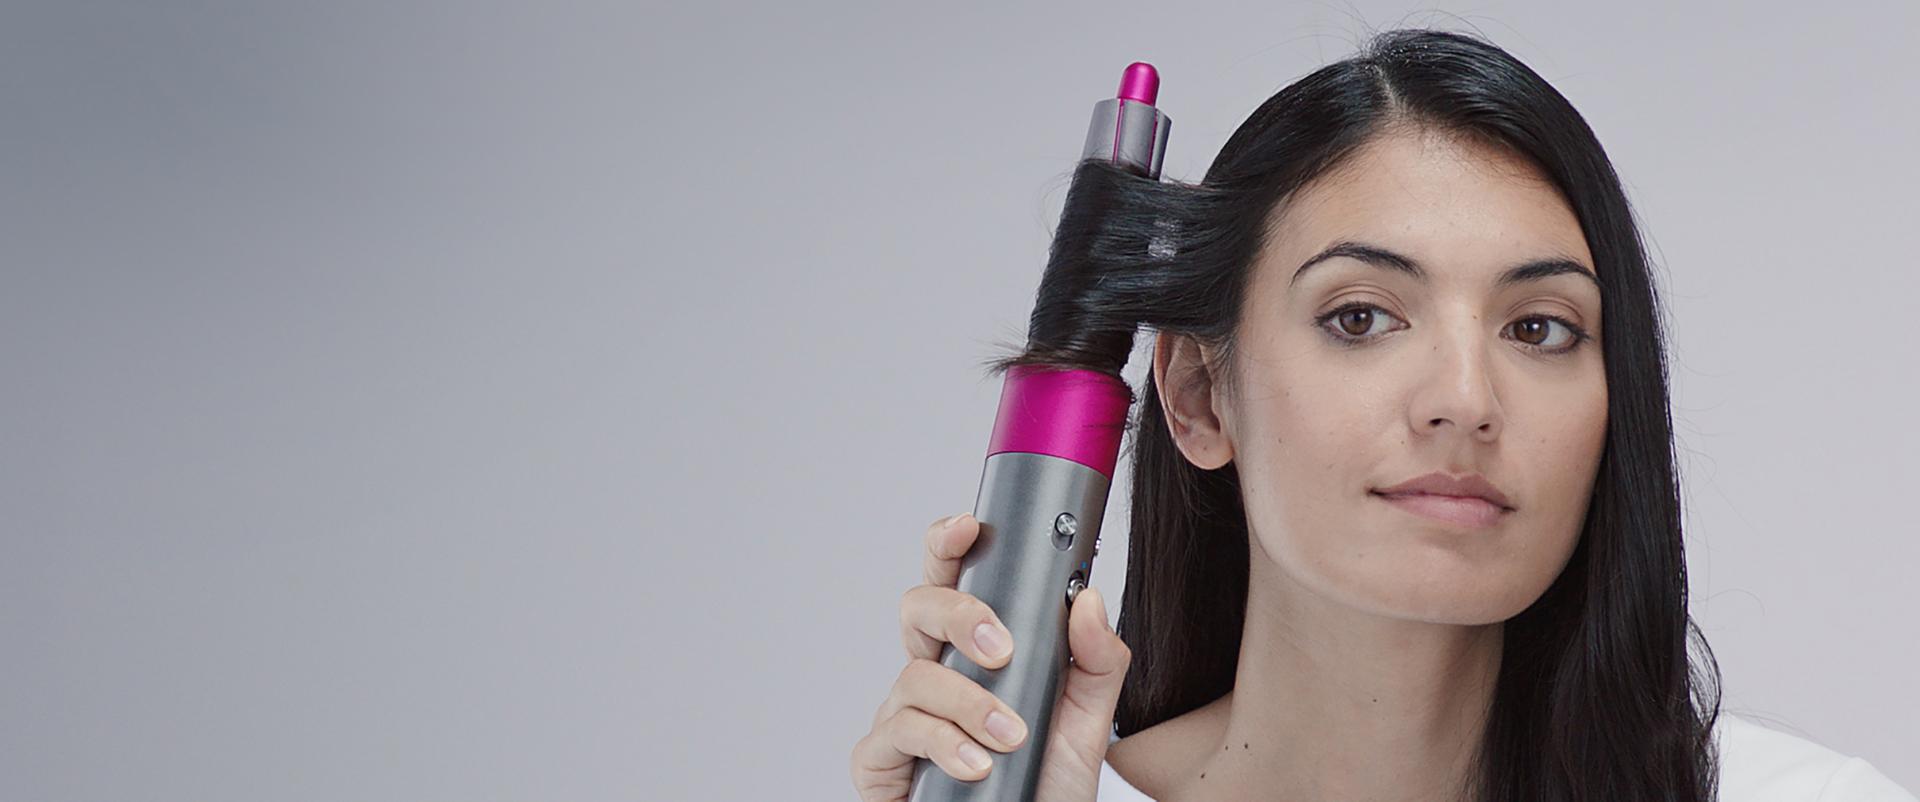 Video showing how to get started with your Dyson Airwrap styler